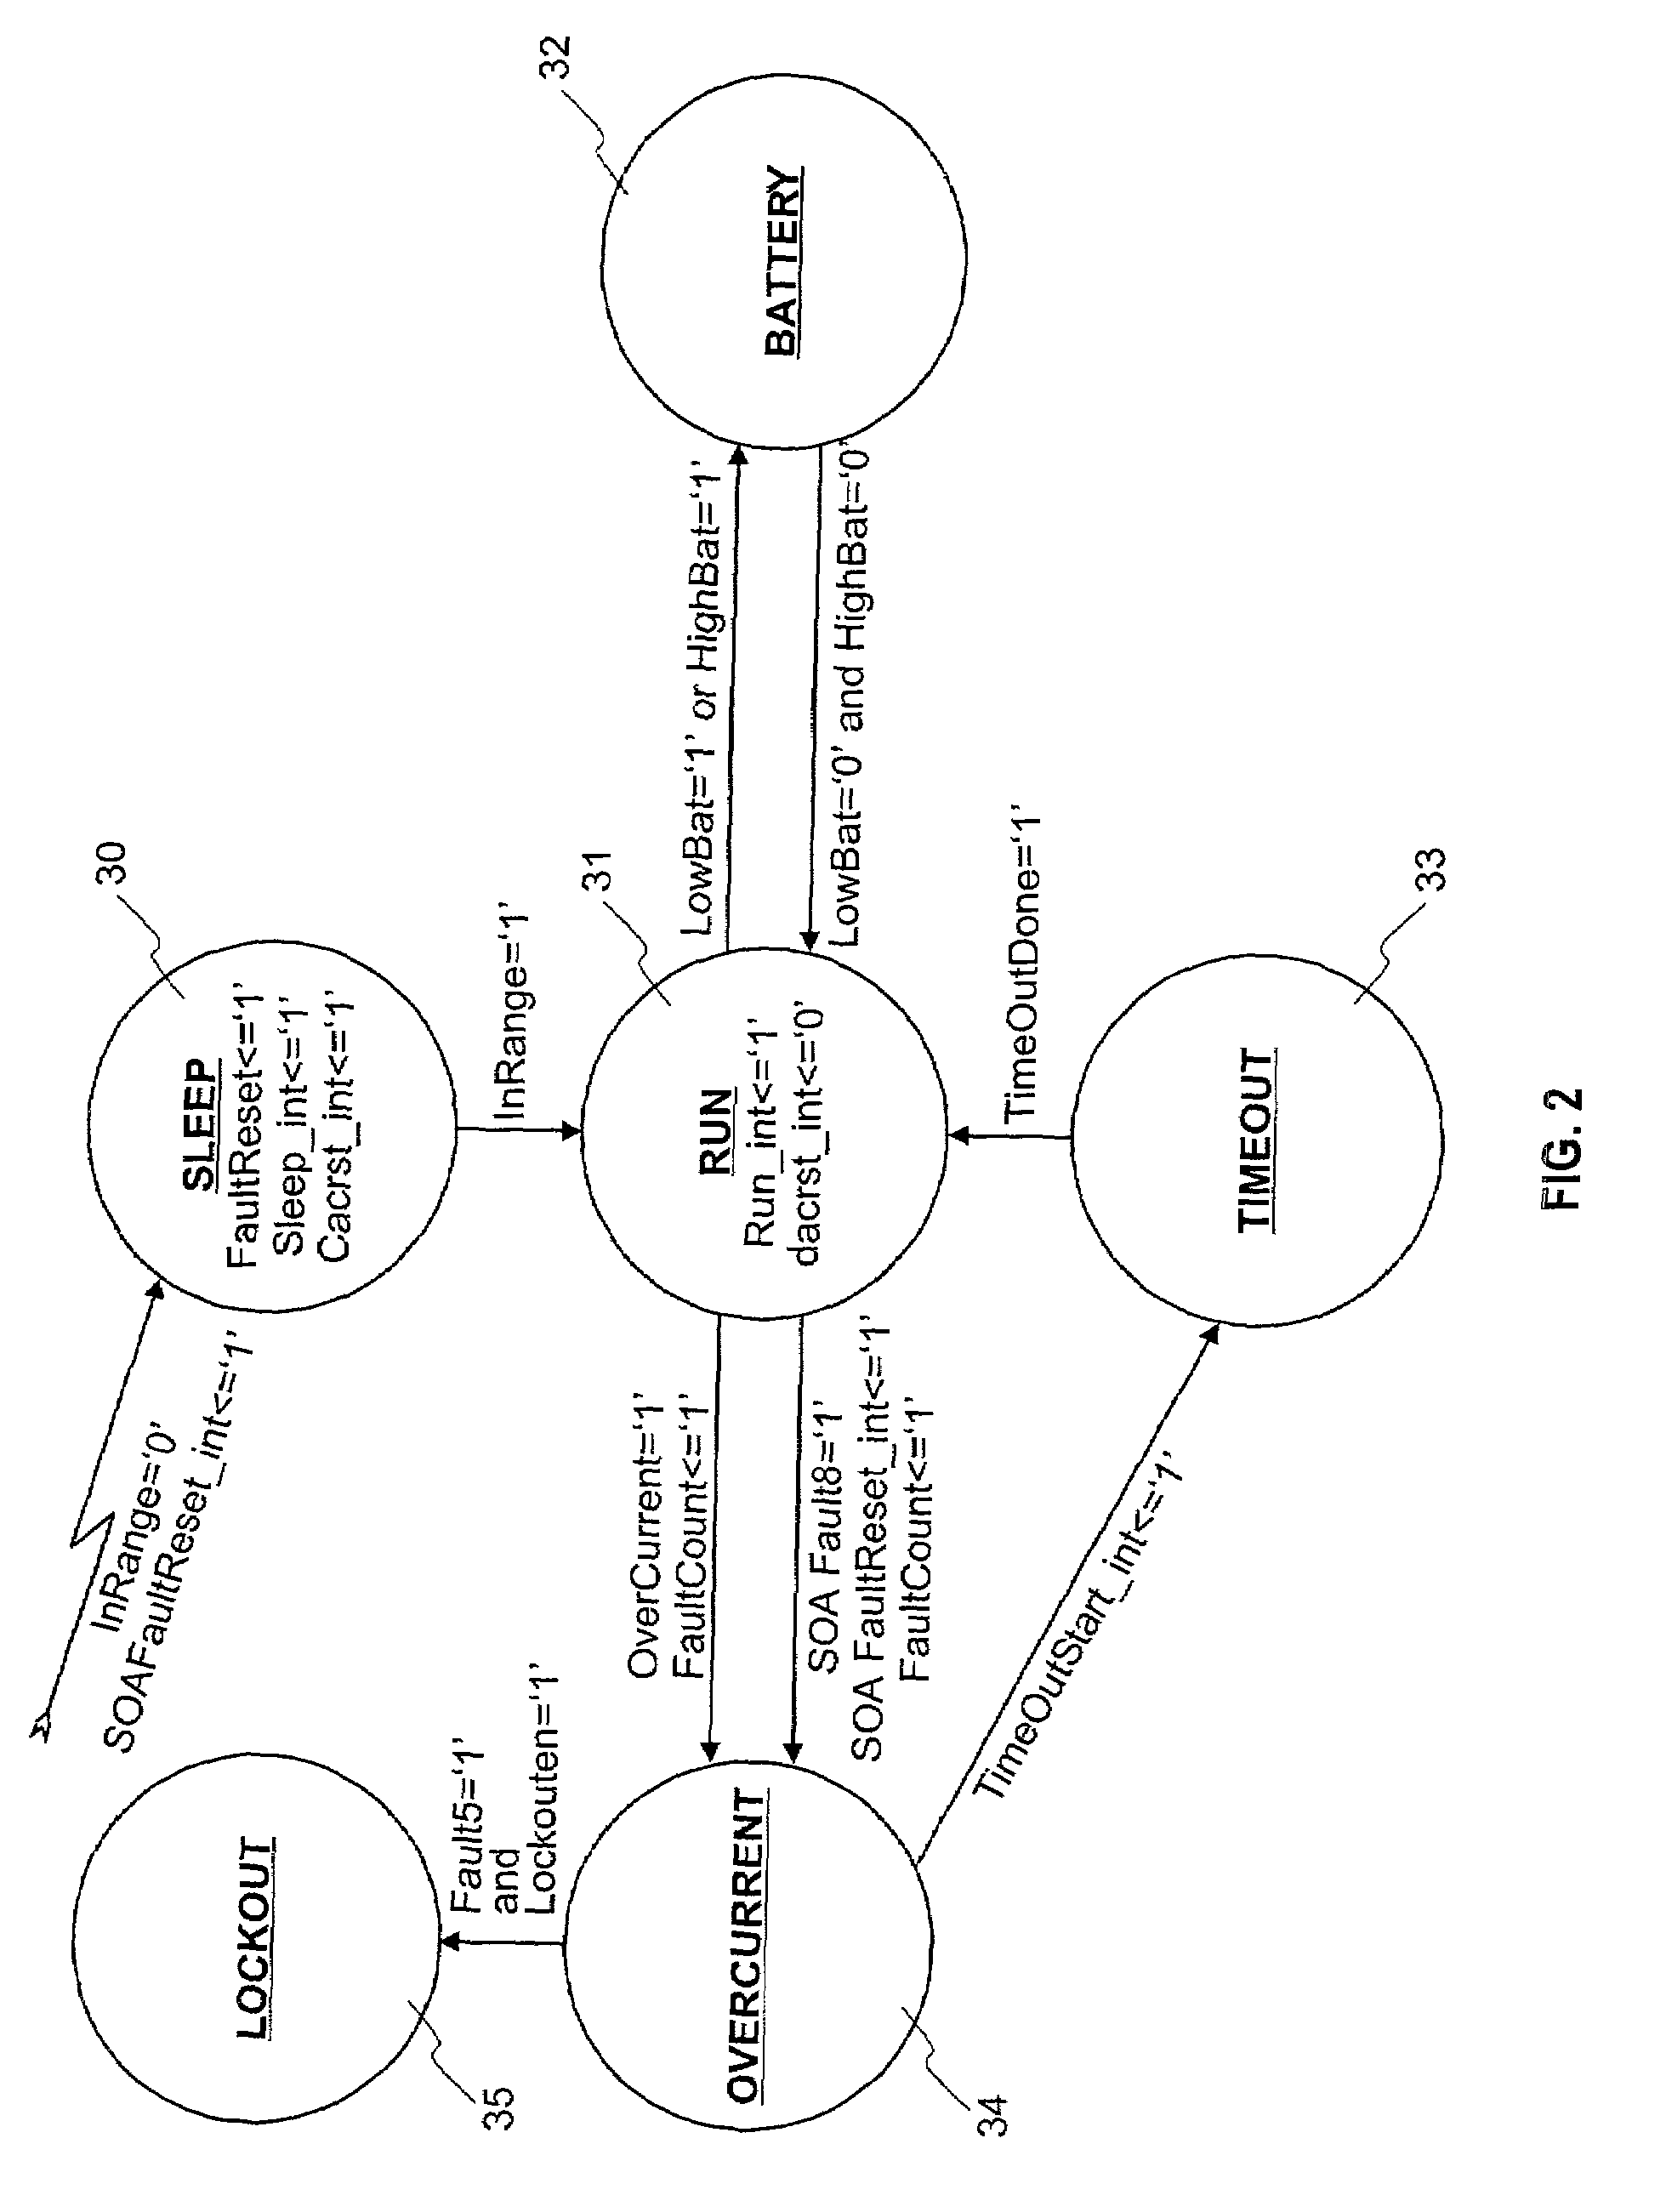 Linear electric motor controller and system for providing linear control